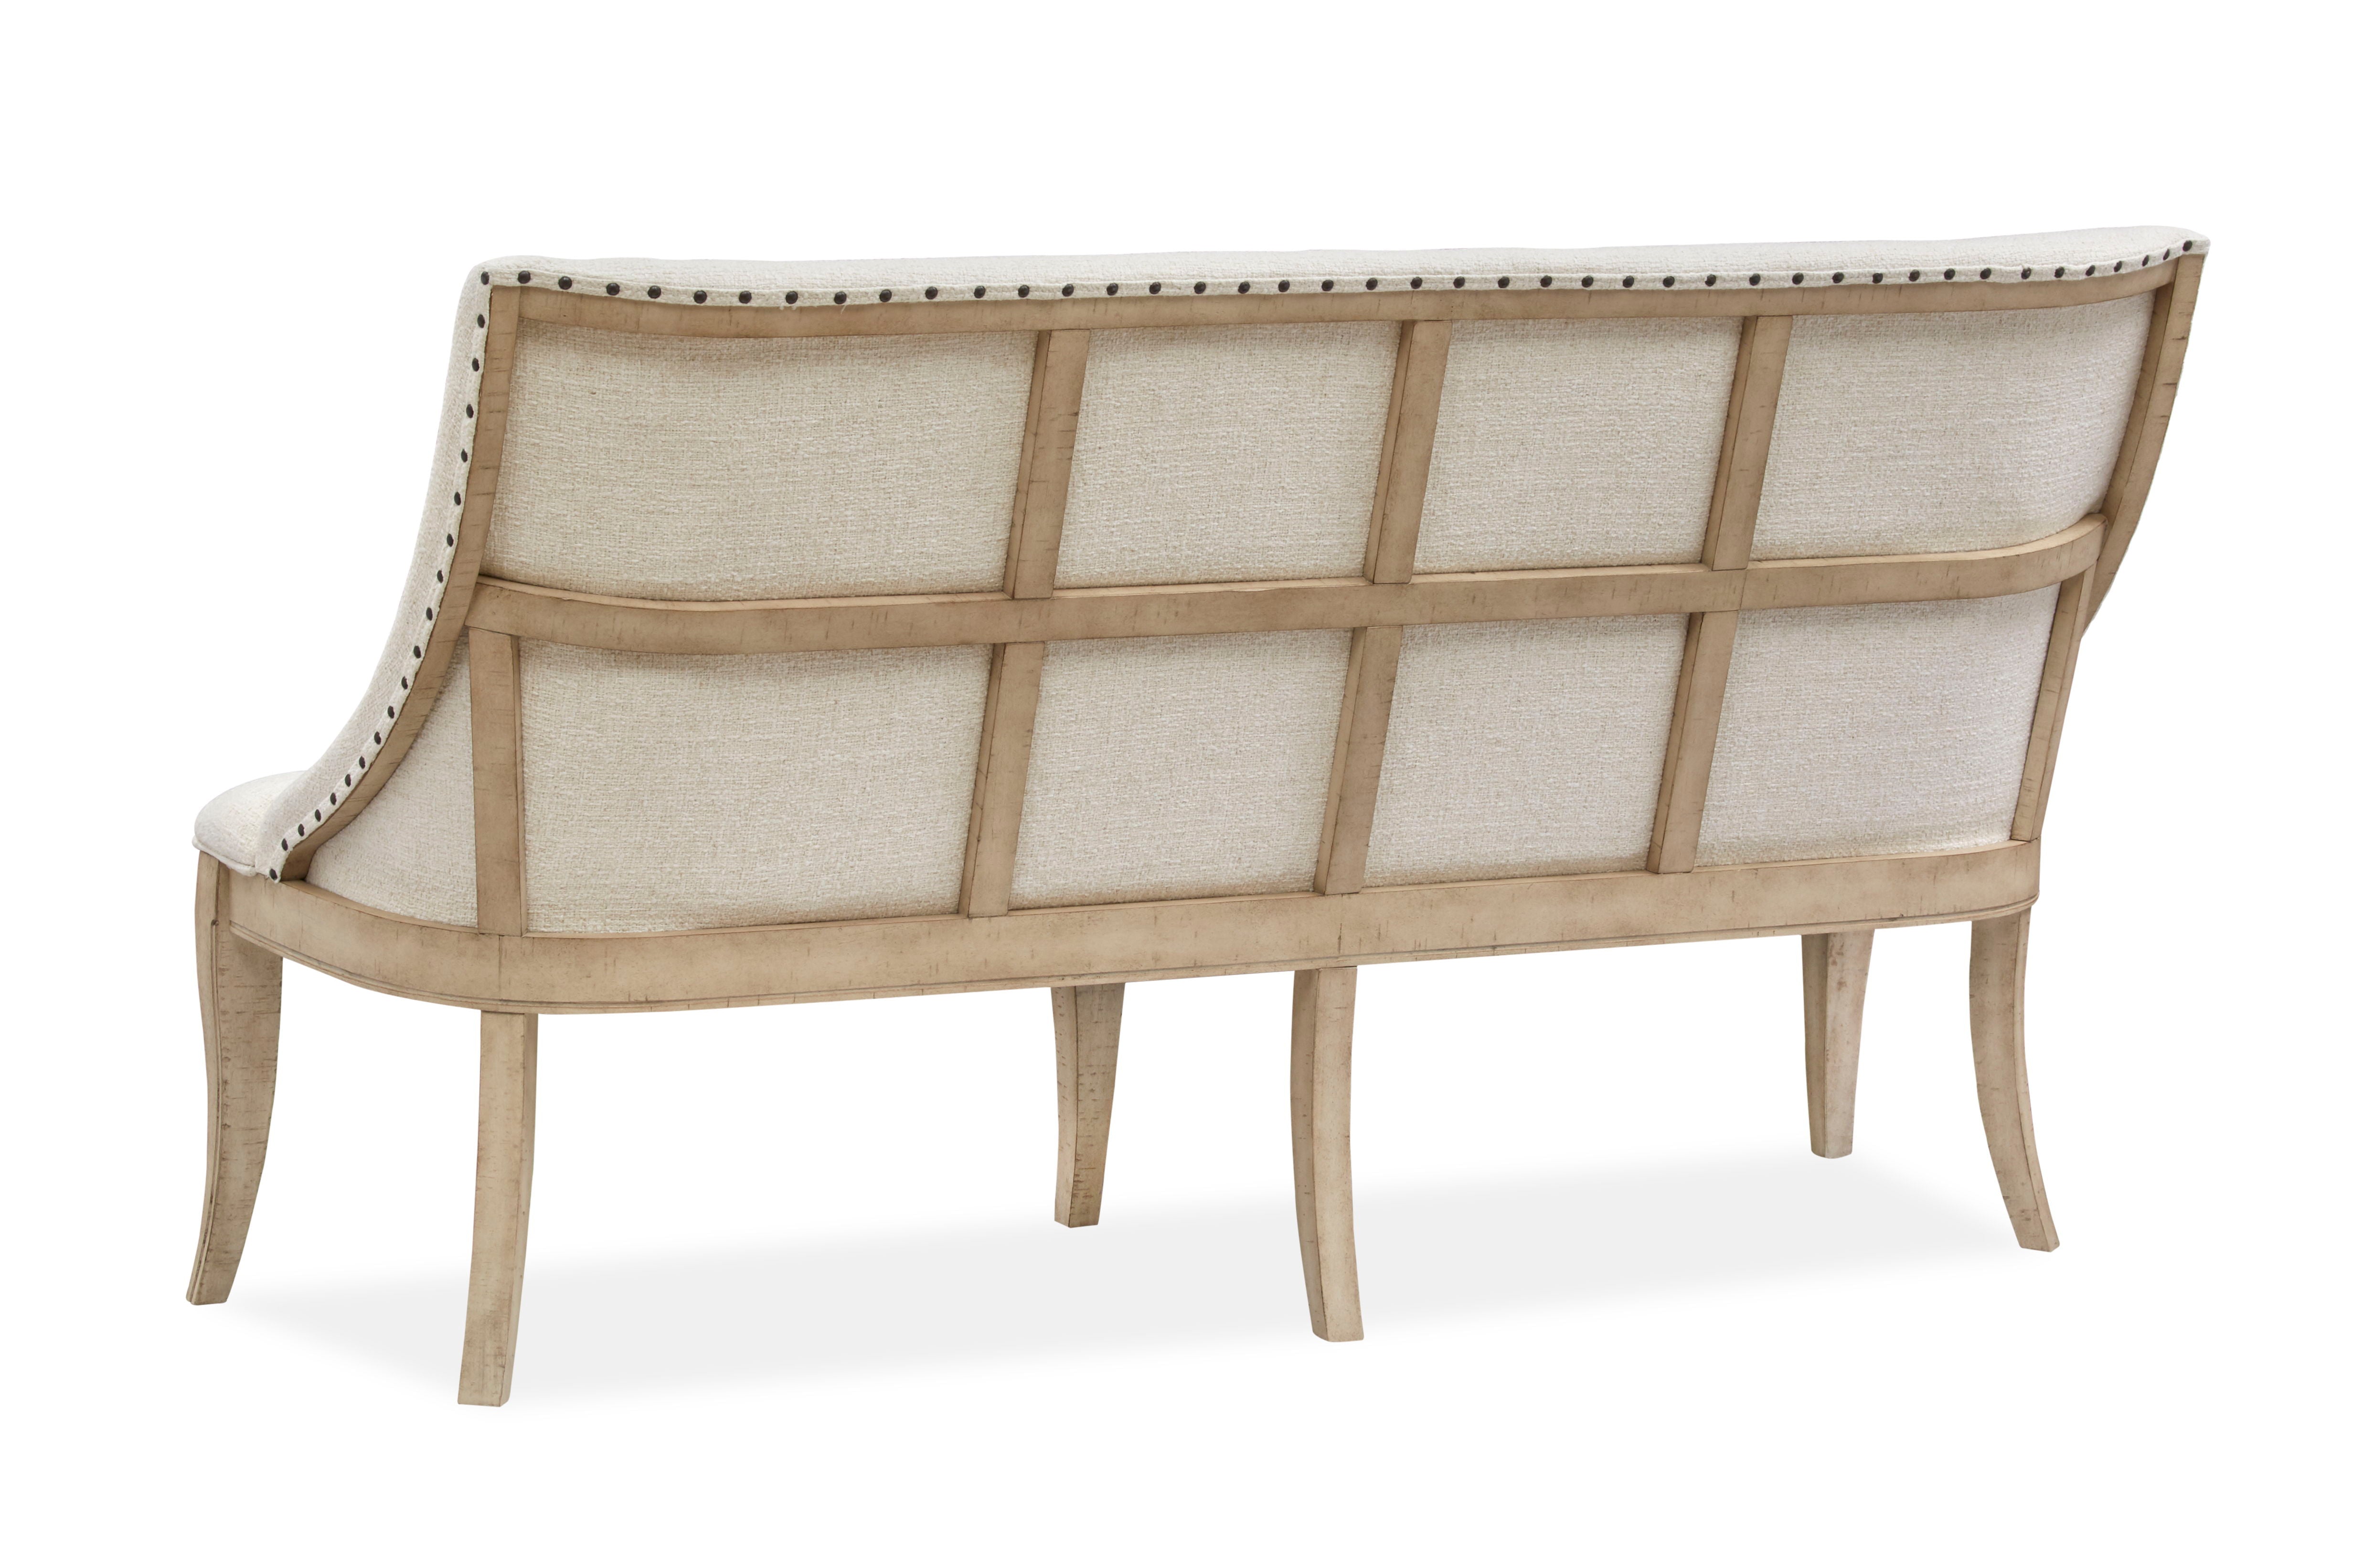 Harlow - Dining Bench With Upholstered Seat & Back - Weathered Bisque